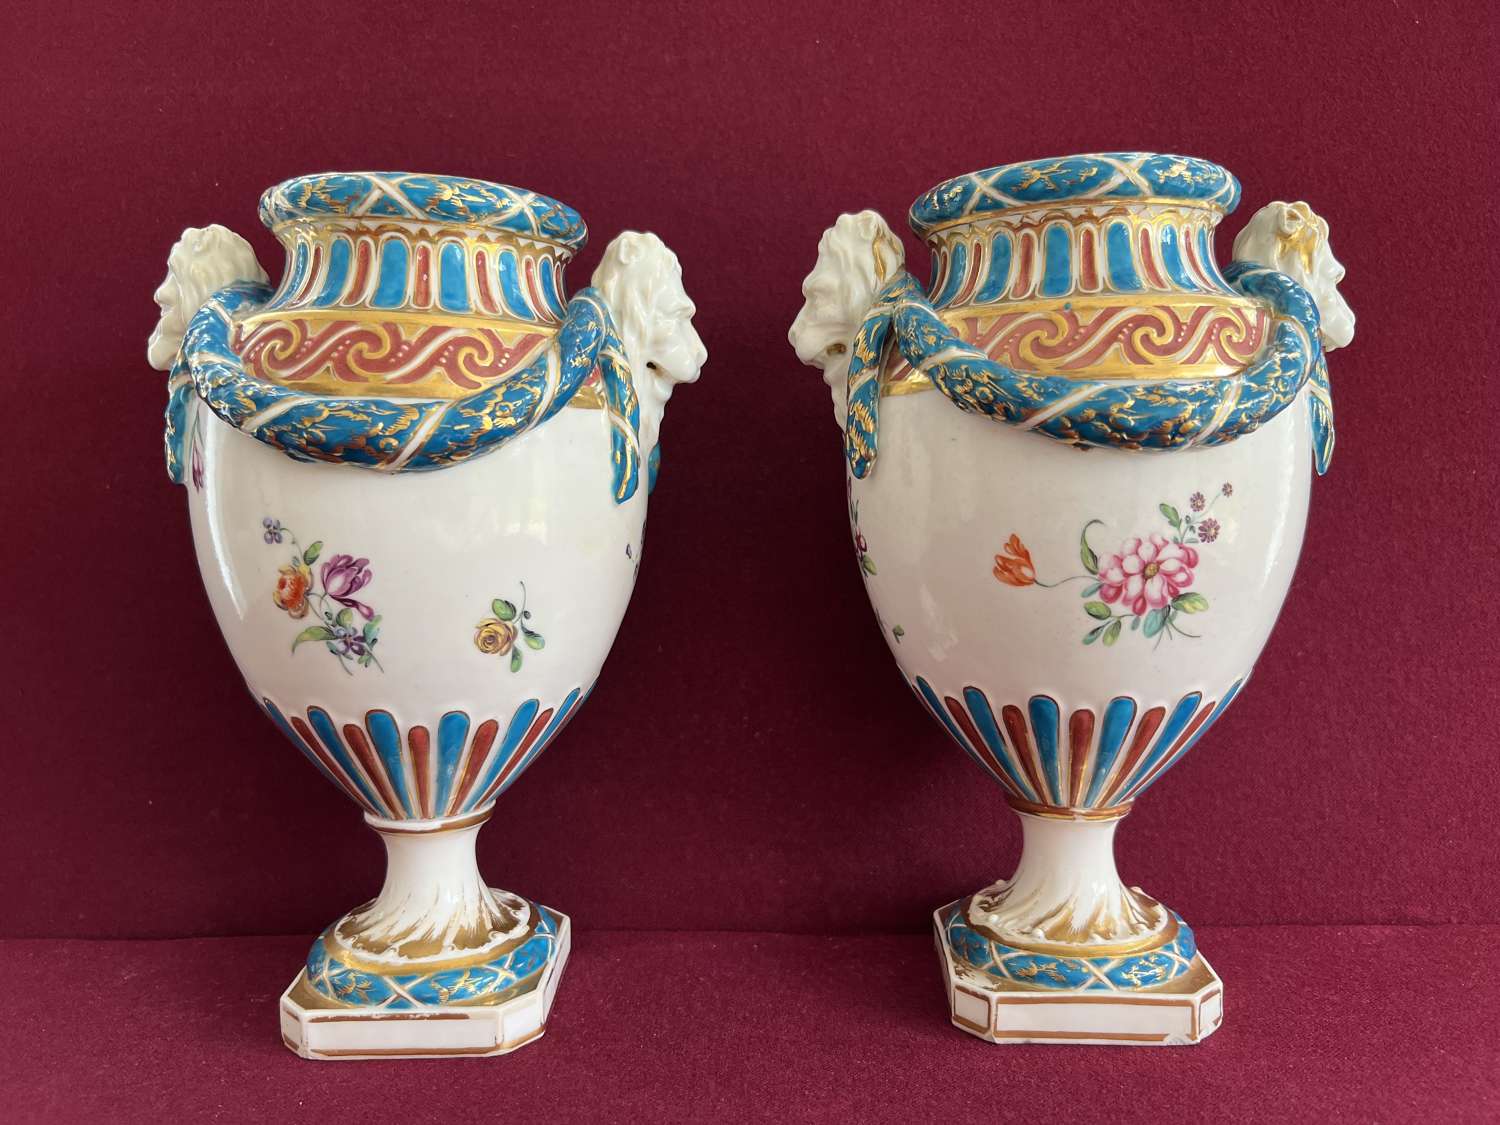 A pair of Chelsea-Derby Rococo inspired Porcelain vases c.1770-1784